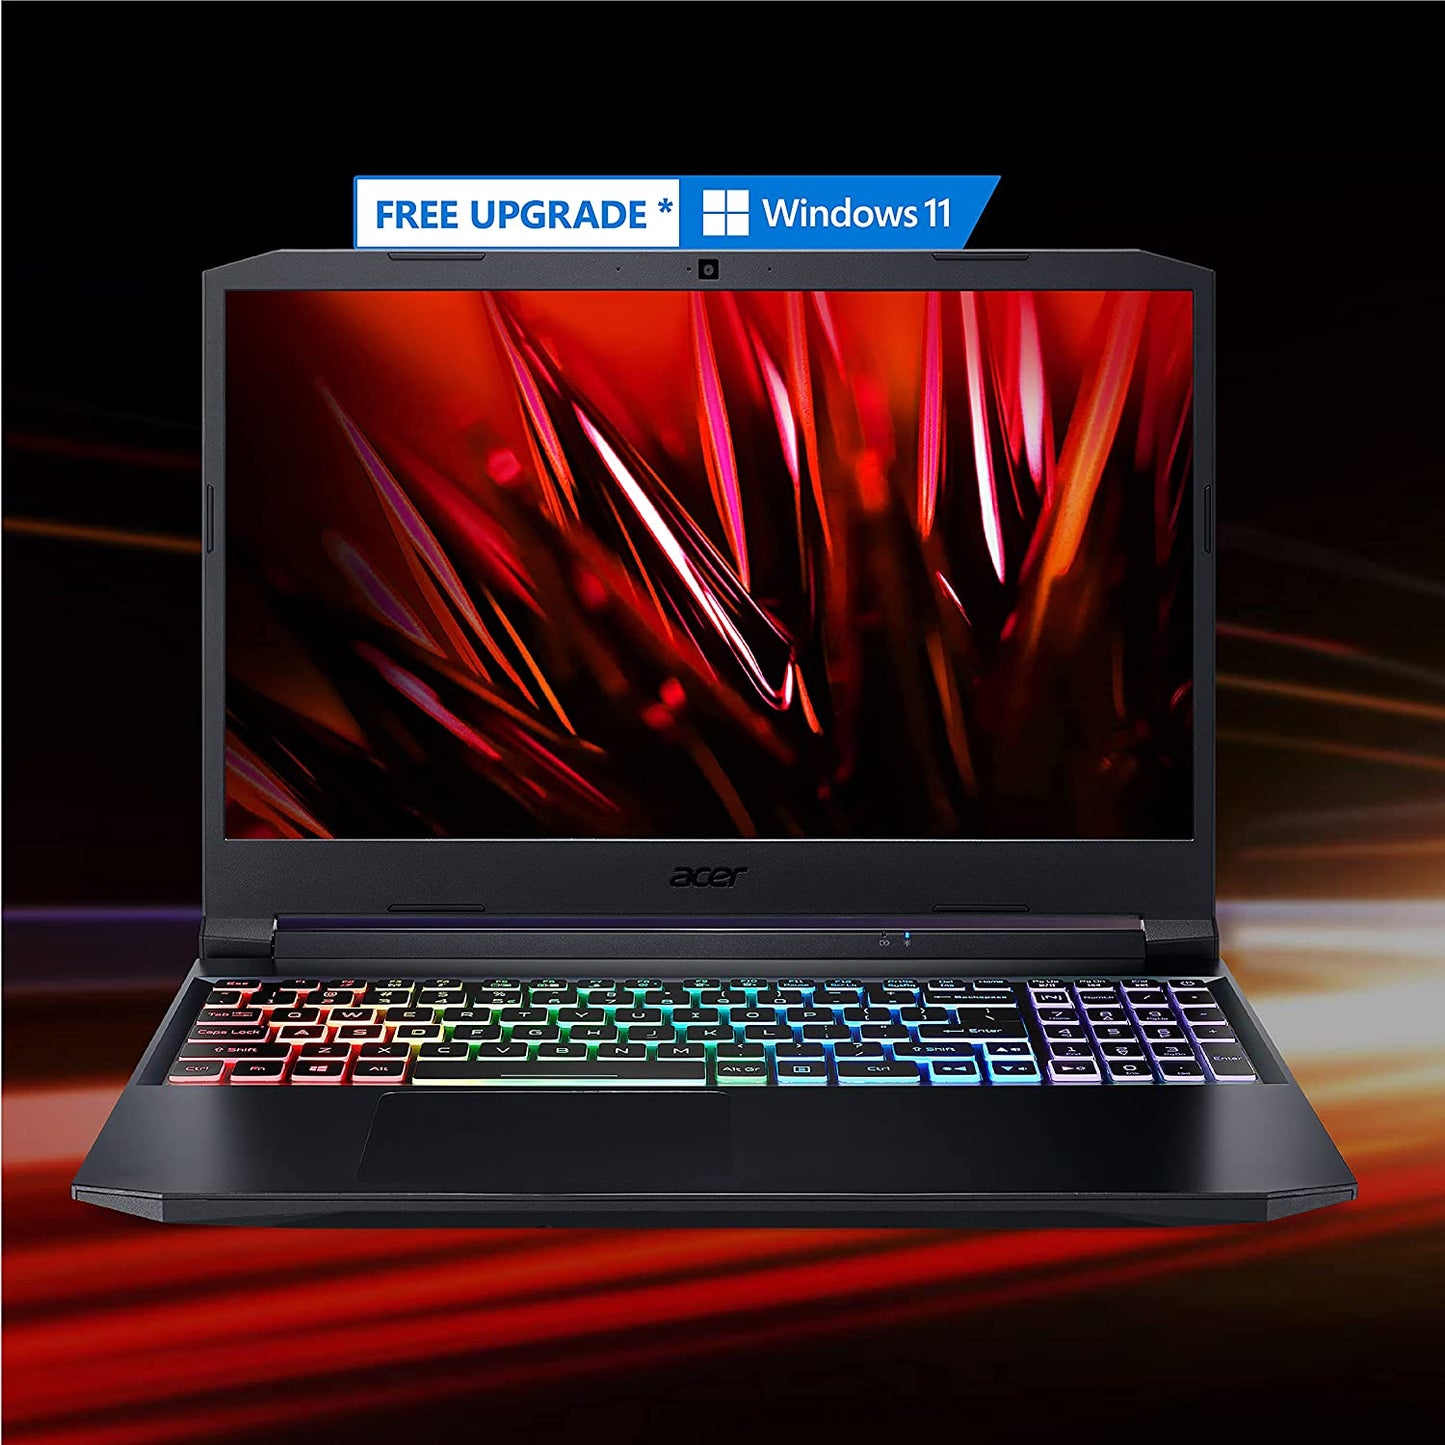 NH.QEHSI.001-Acer Nitro 5 gaming laptop Intel core i5 11th Gen (Windows 11 Home/8 GB/512 GB SSD/ NVIDIA® GeForce GTX 1650/144hz) AN515-57 with 39.6 cm (15.6 inches) IPS display